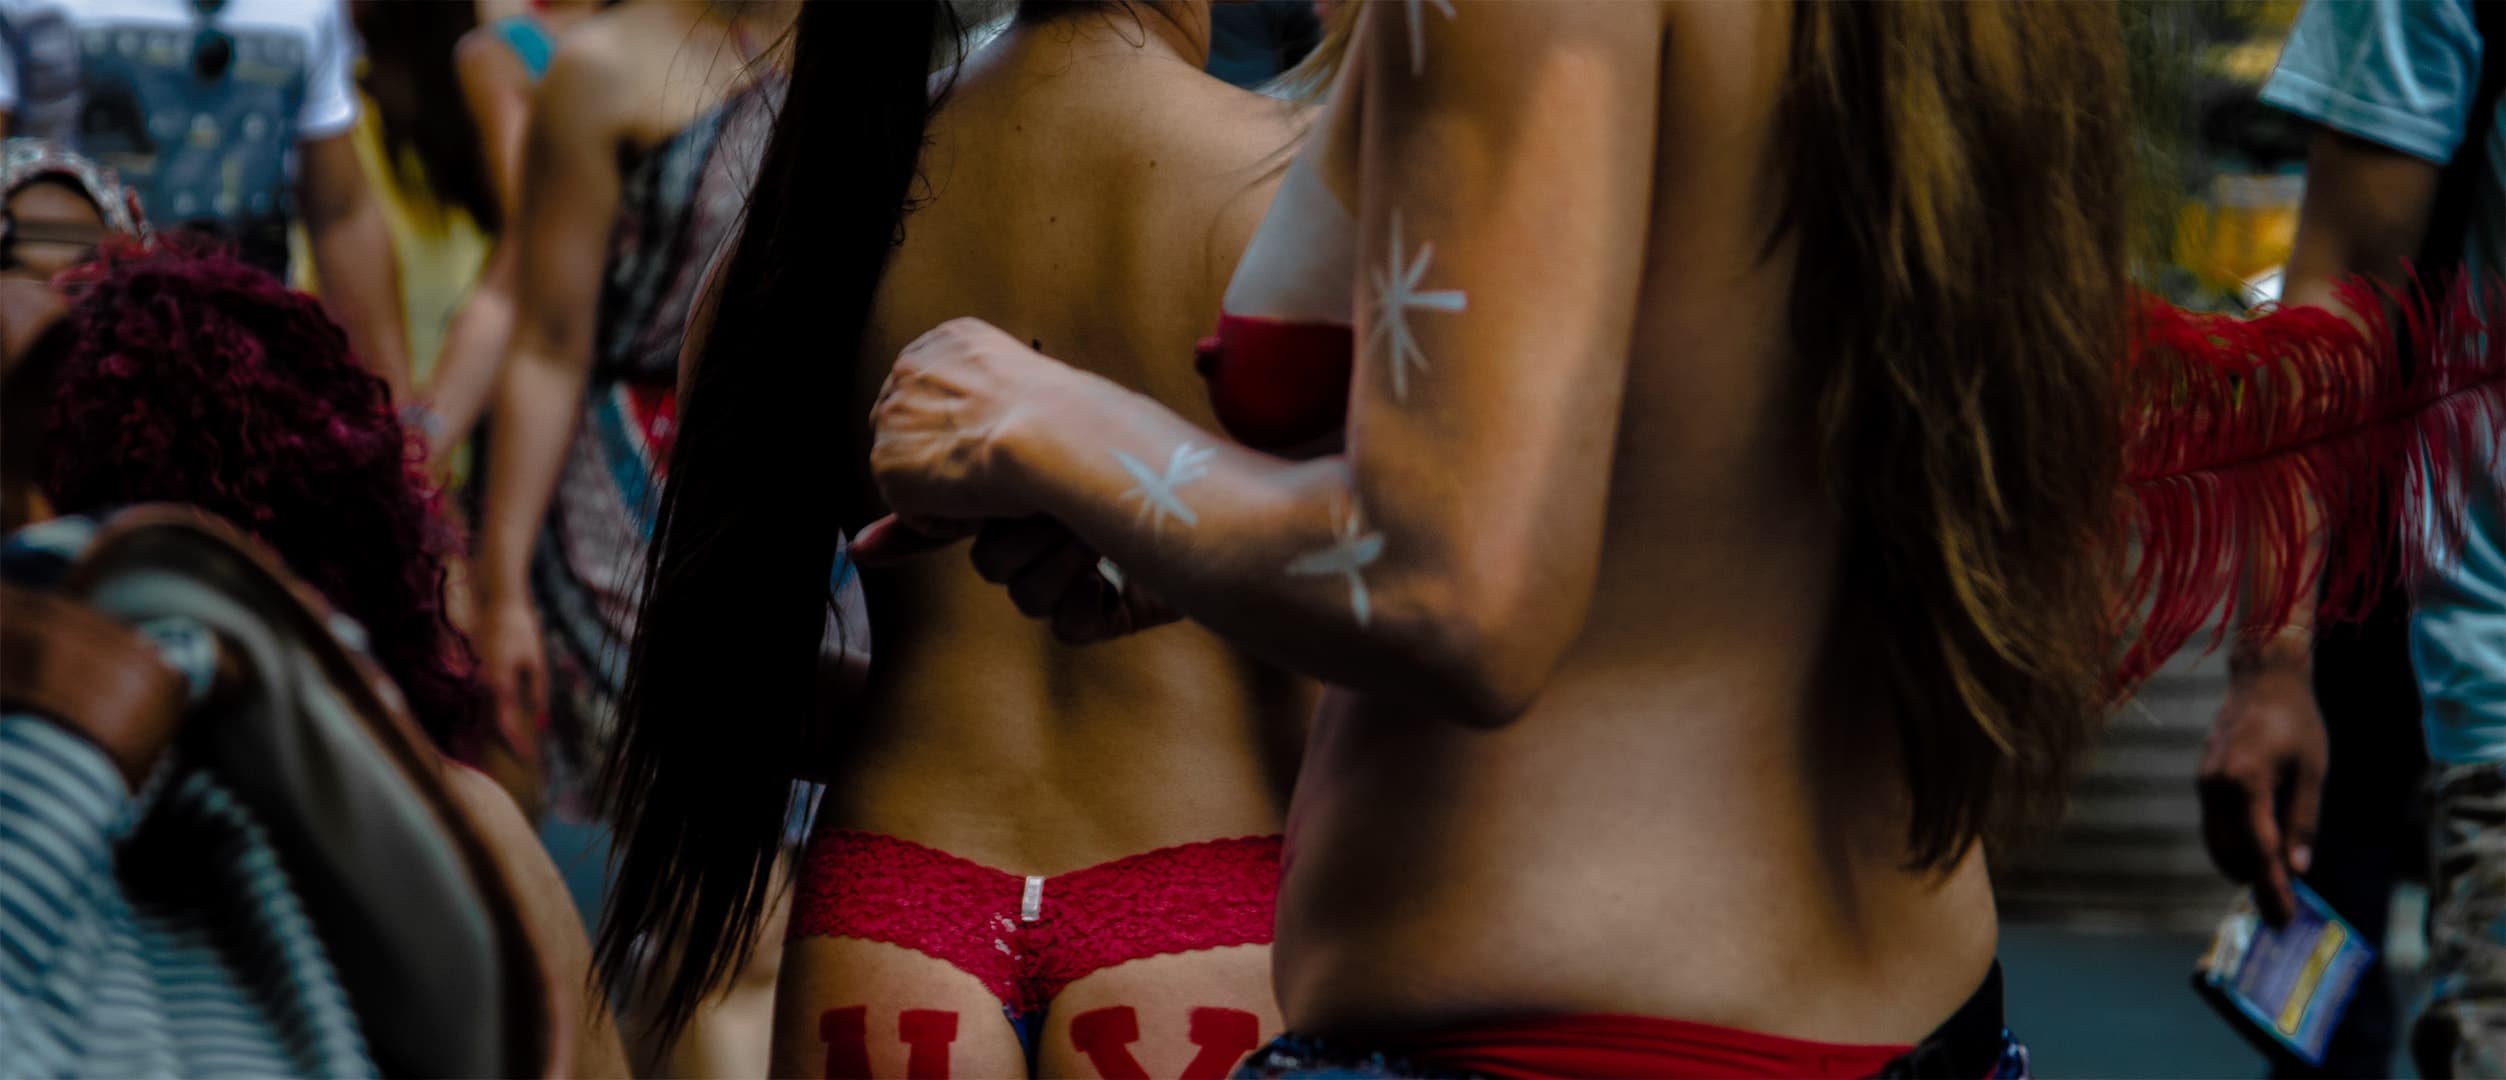 Naked Cowgirls, Times Square, Manhattan (2016)